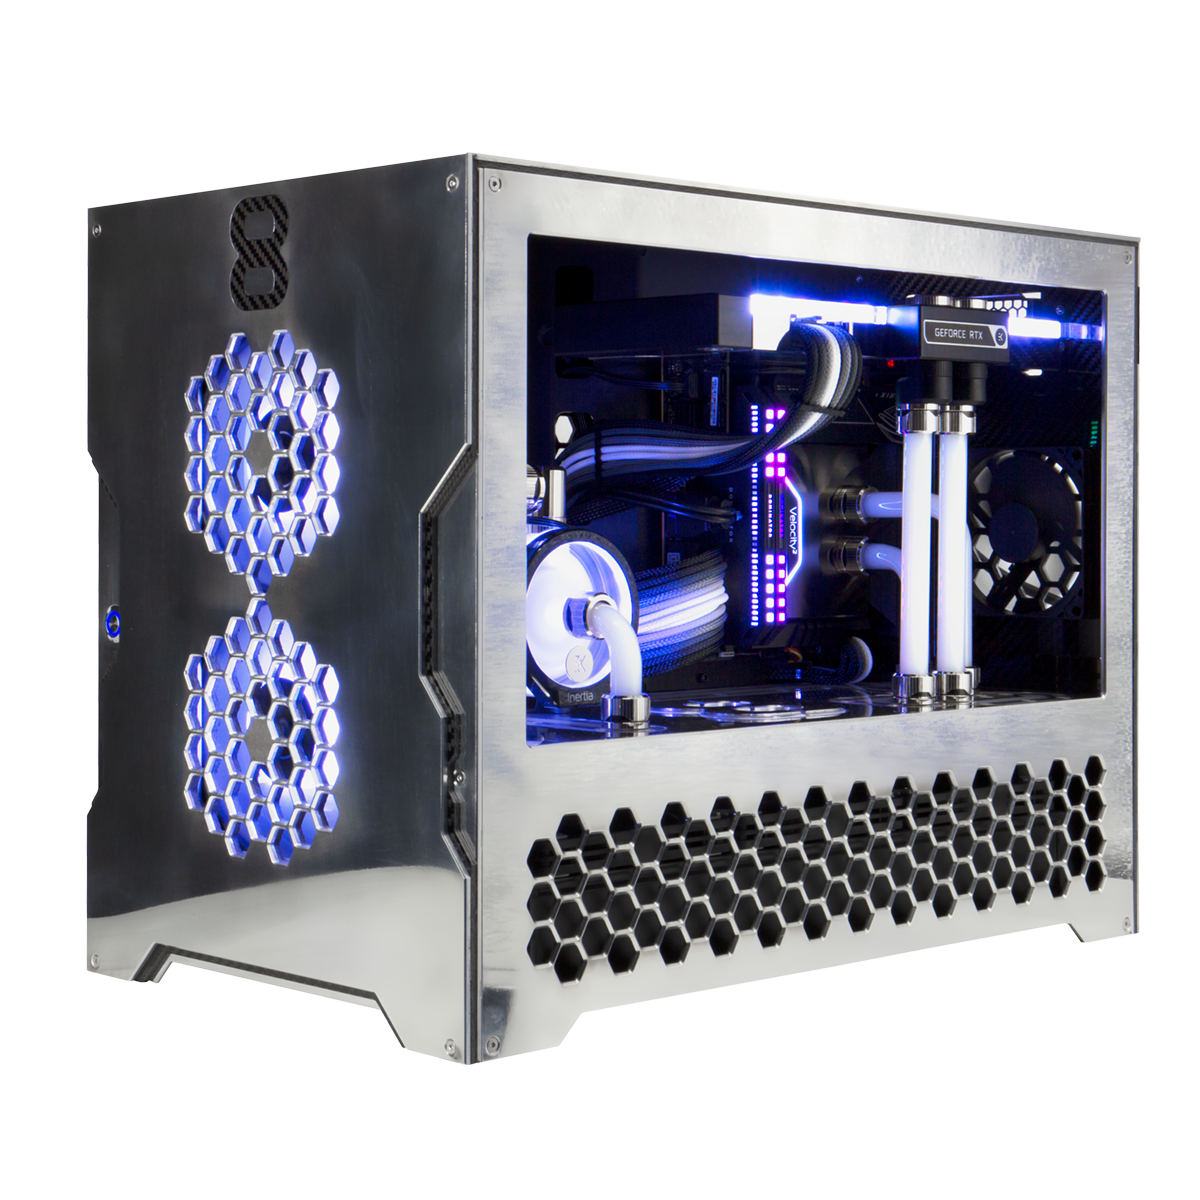 8Pack - 8Pack Asteroid MK2 - Intel Core i9 14900K - Nvidia GeForce RTX 4090 Extreme Gaming PC